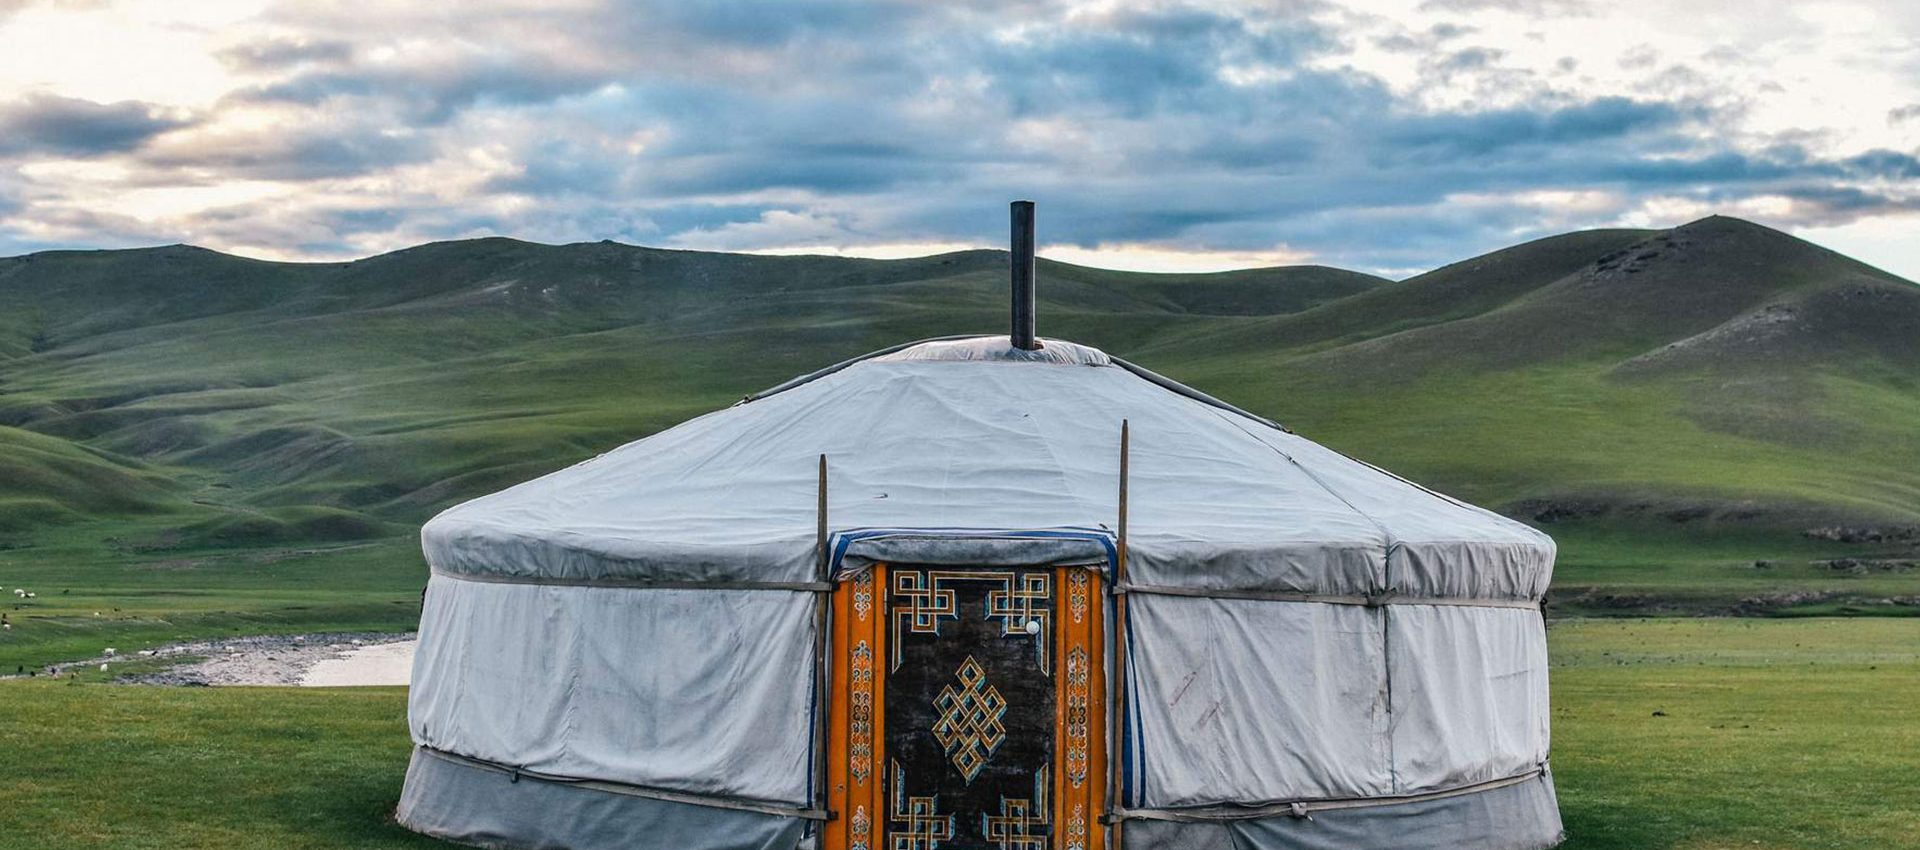 Sleeping in yurt is the best way to experience the vibe of the Steppe.